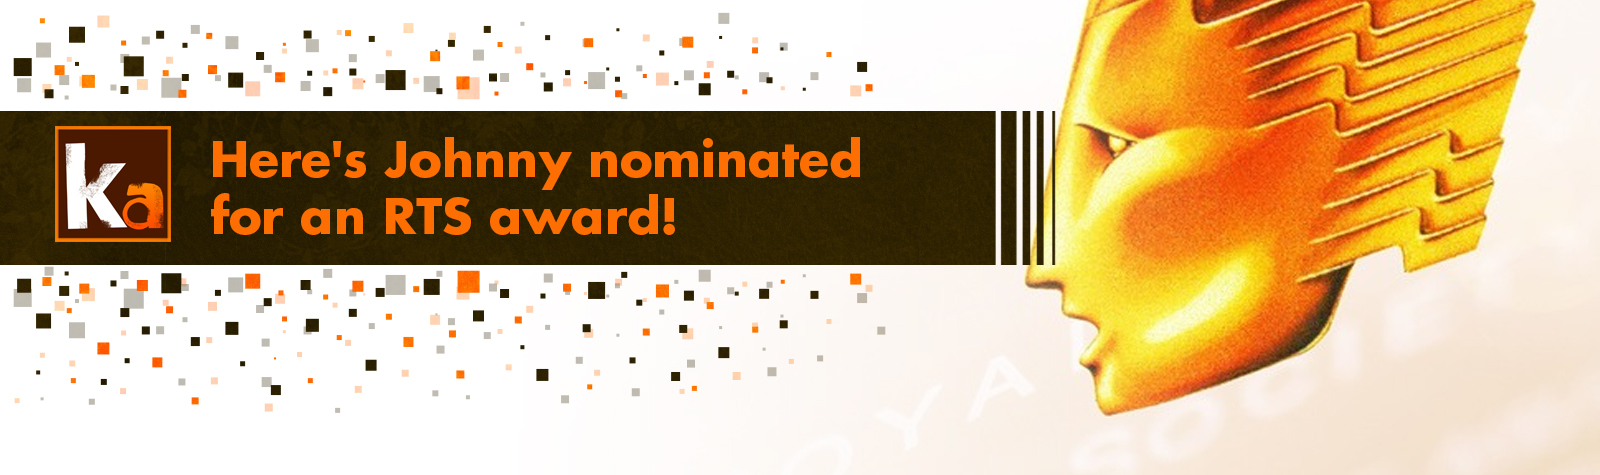 Here’s Johnny nominated for an RTS award!